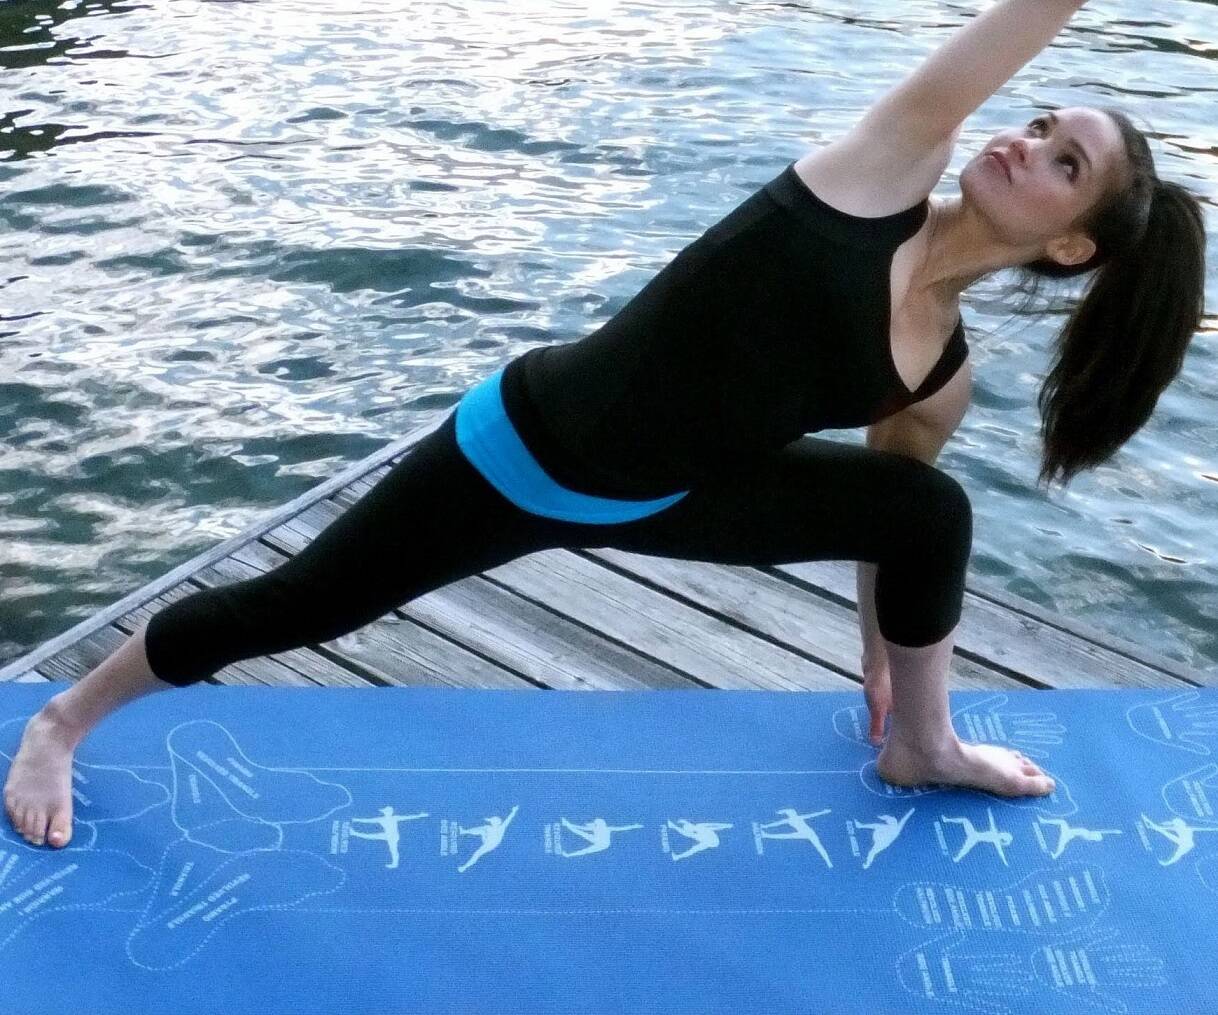 Instructional Yoga Mat - //coolthings.us